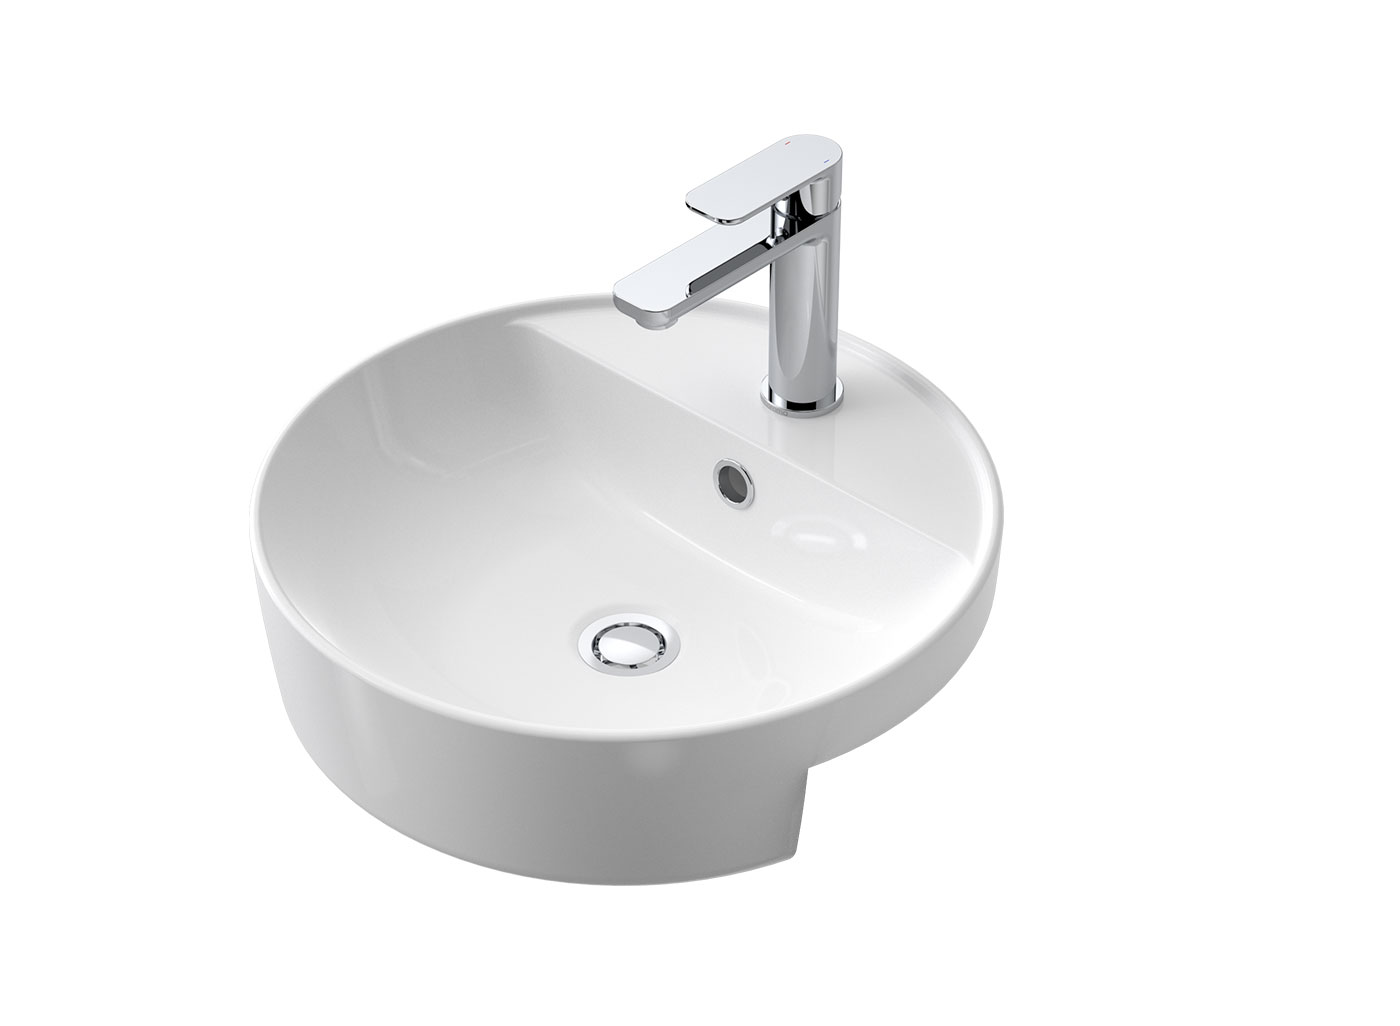 The Tribute collection features a stylish array of basins to suit a range of bathroom and lifestyle needs. Designed and built with Australian ingenuity to bring the best in modern design to your bathroom.